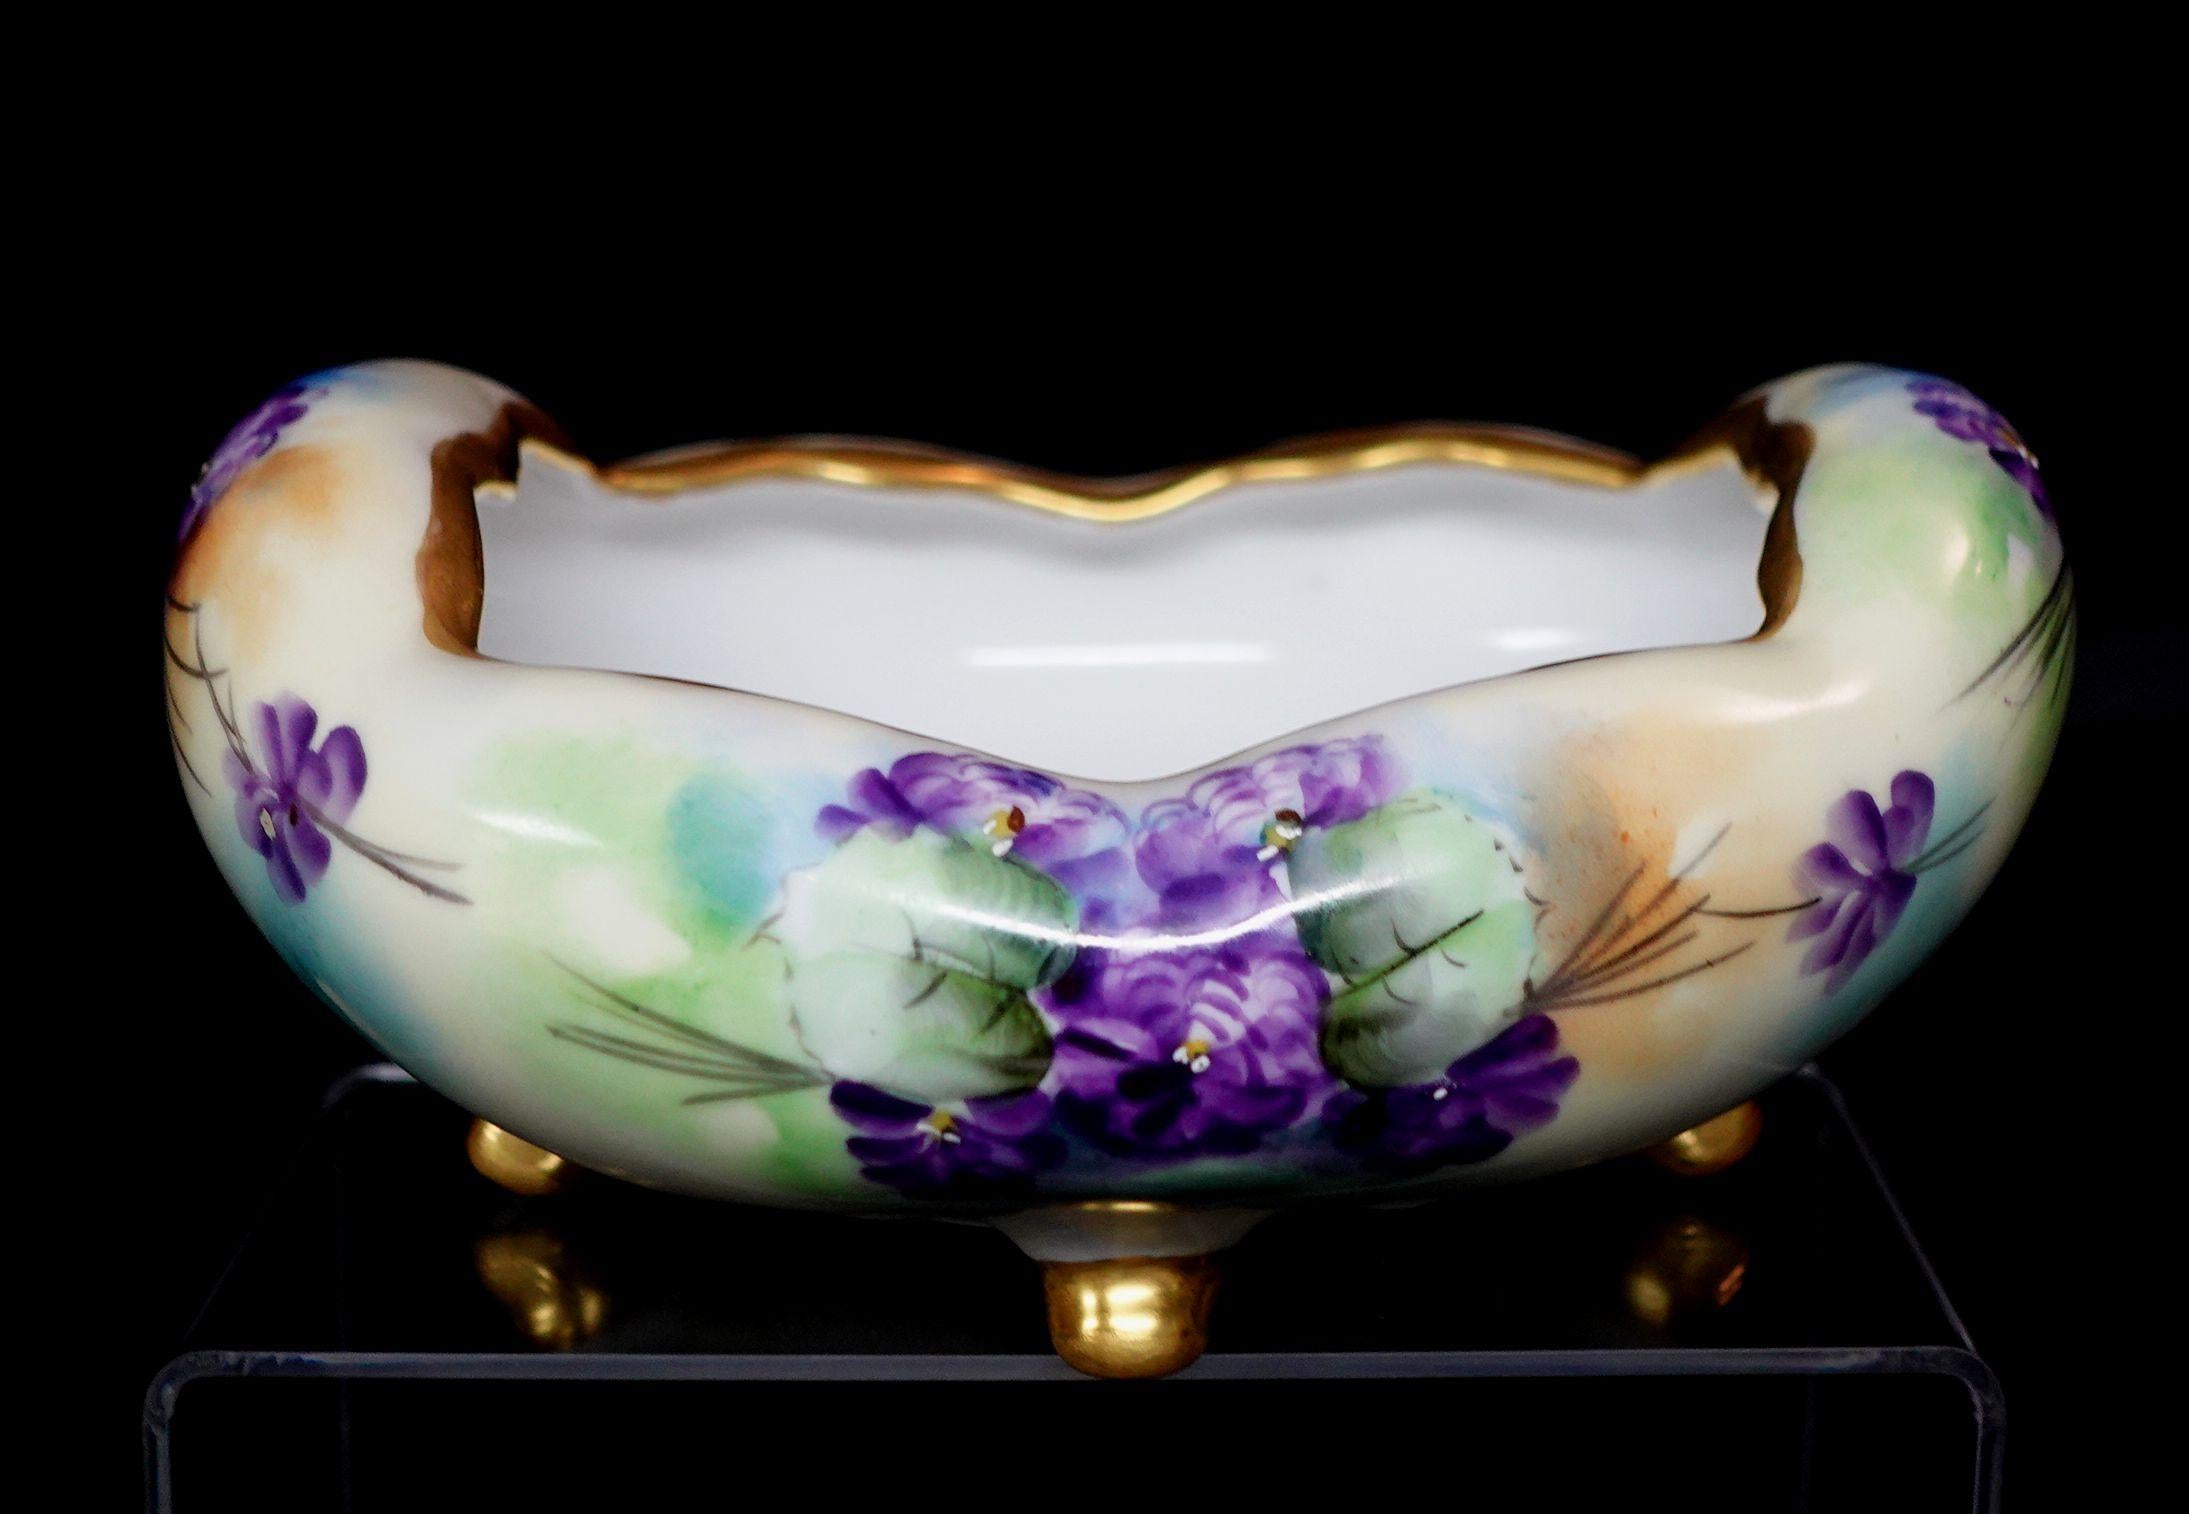 A wonderful antique M.Z. Austria Porcelain footed bowl with charming floral design in multi colors, all hand-painted very attractive shapes, and tone unmark, a great artwork.

Dimensions: vase 7.5